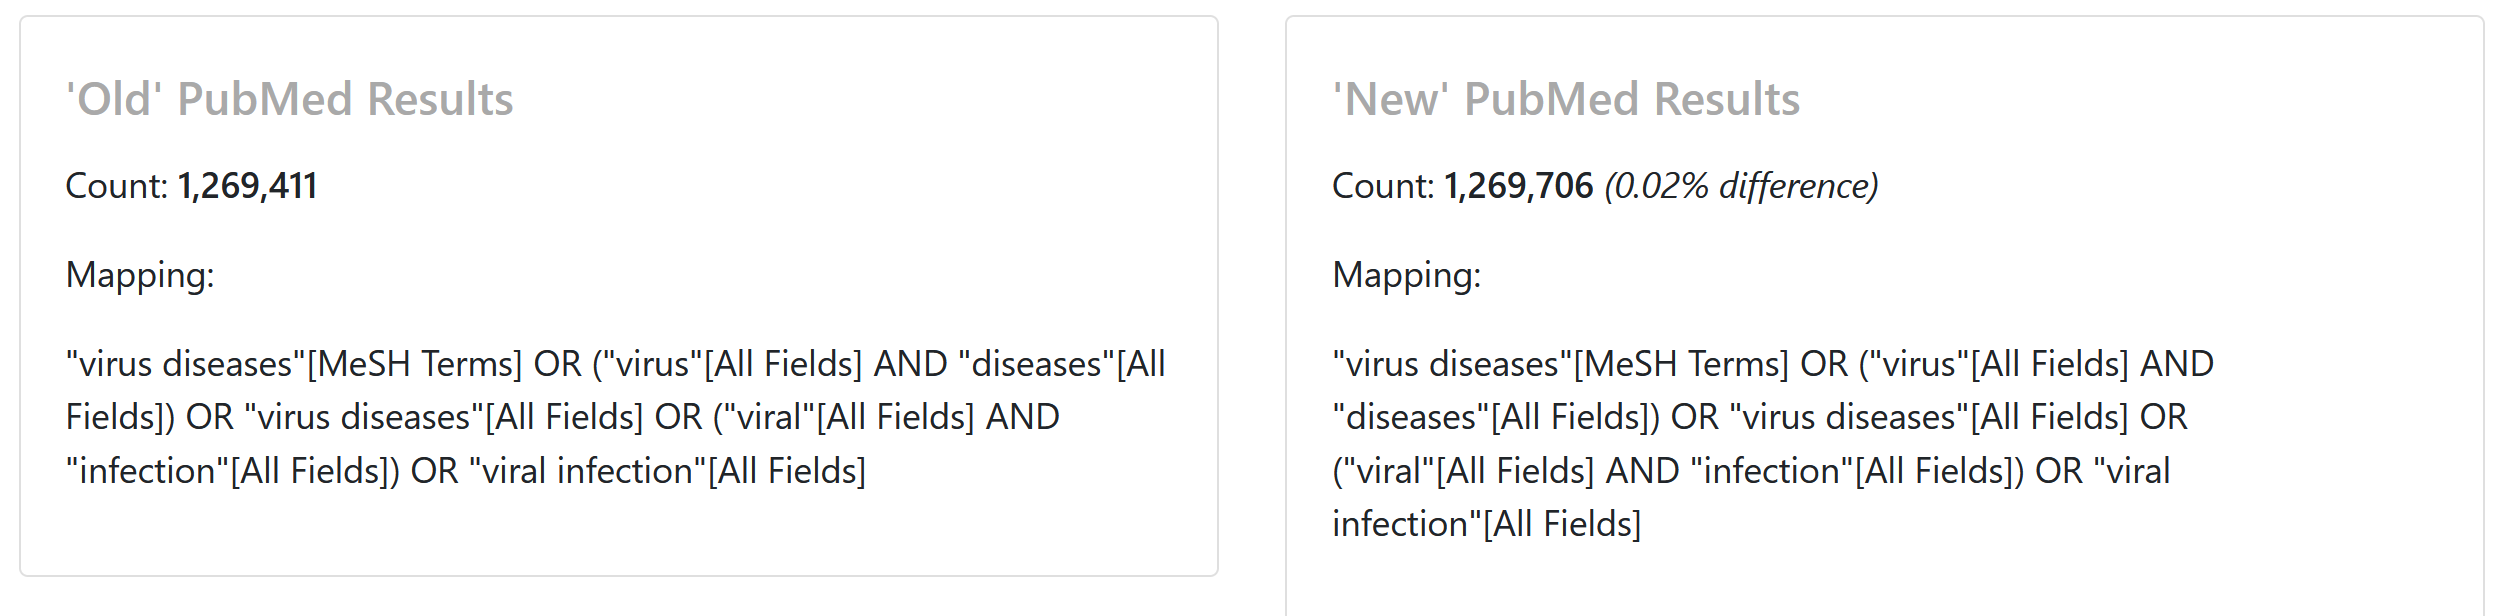 Old and new mapping for 'viral infection'